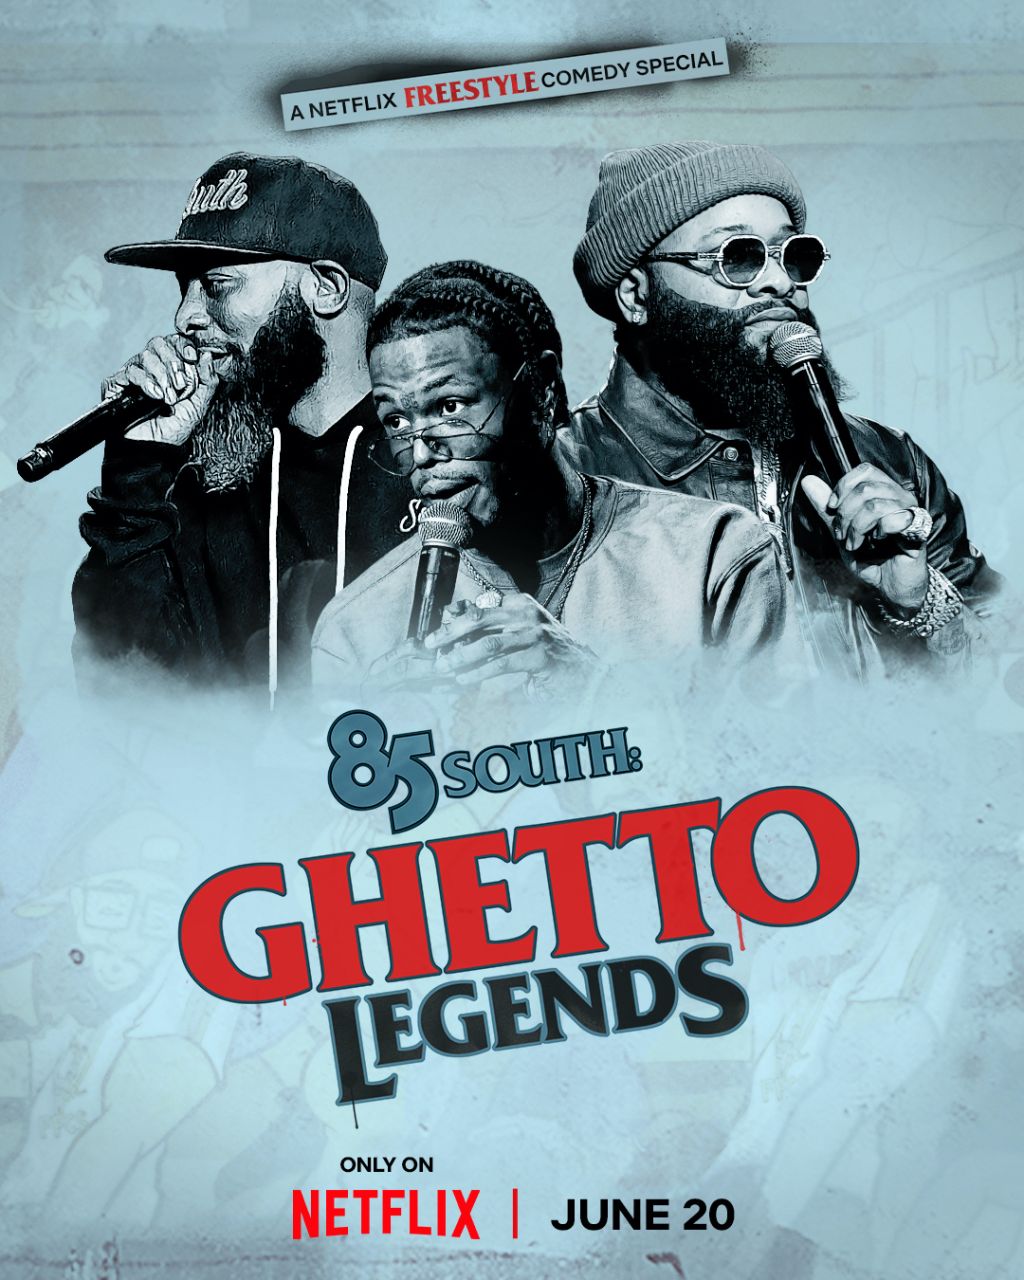 85 South: Ghetto Legends key art and images